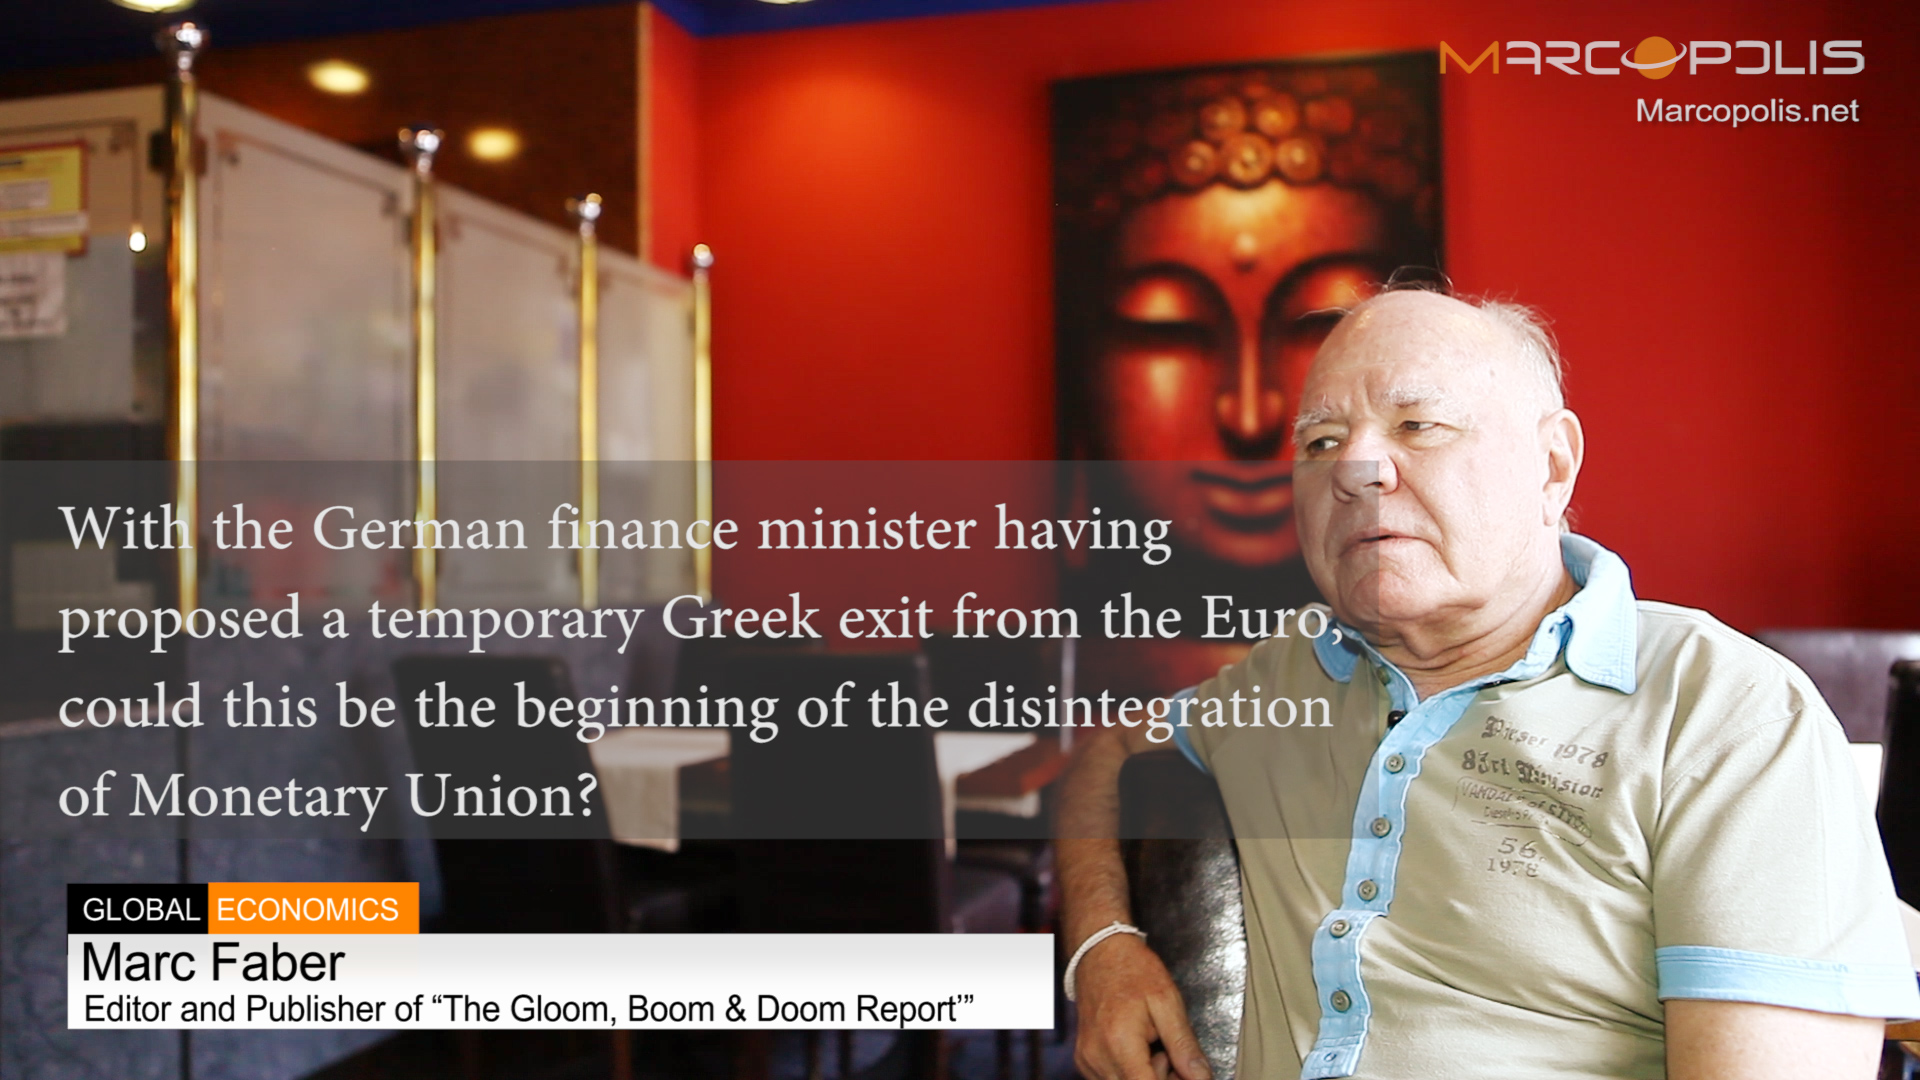 Marc Faber on the Eurozone and Sovereign defaults